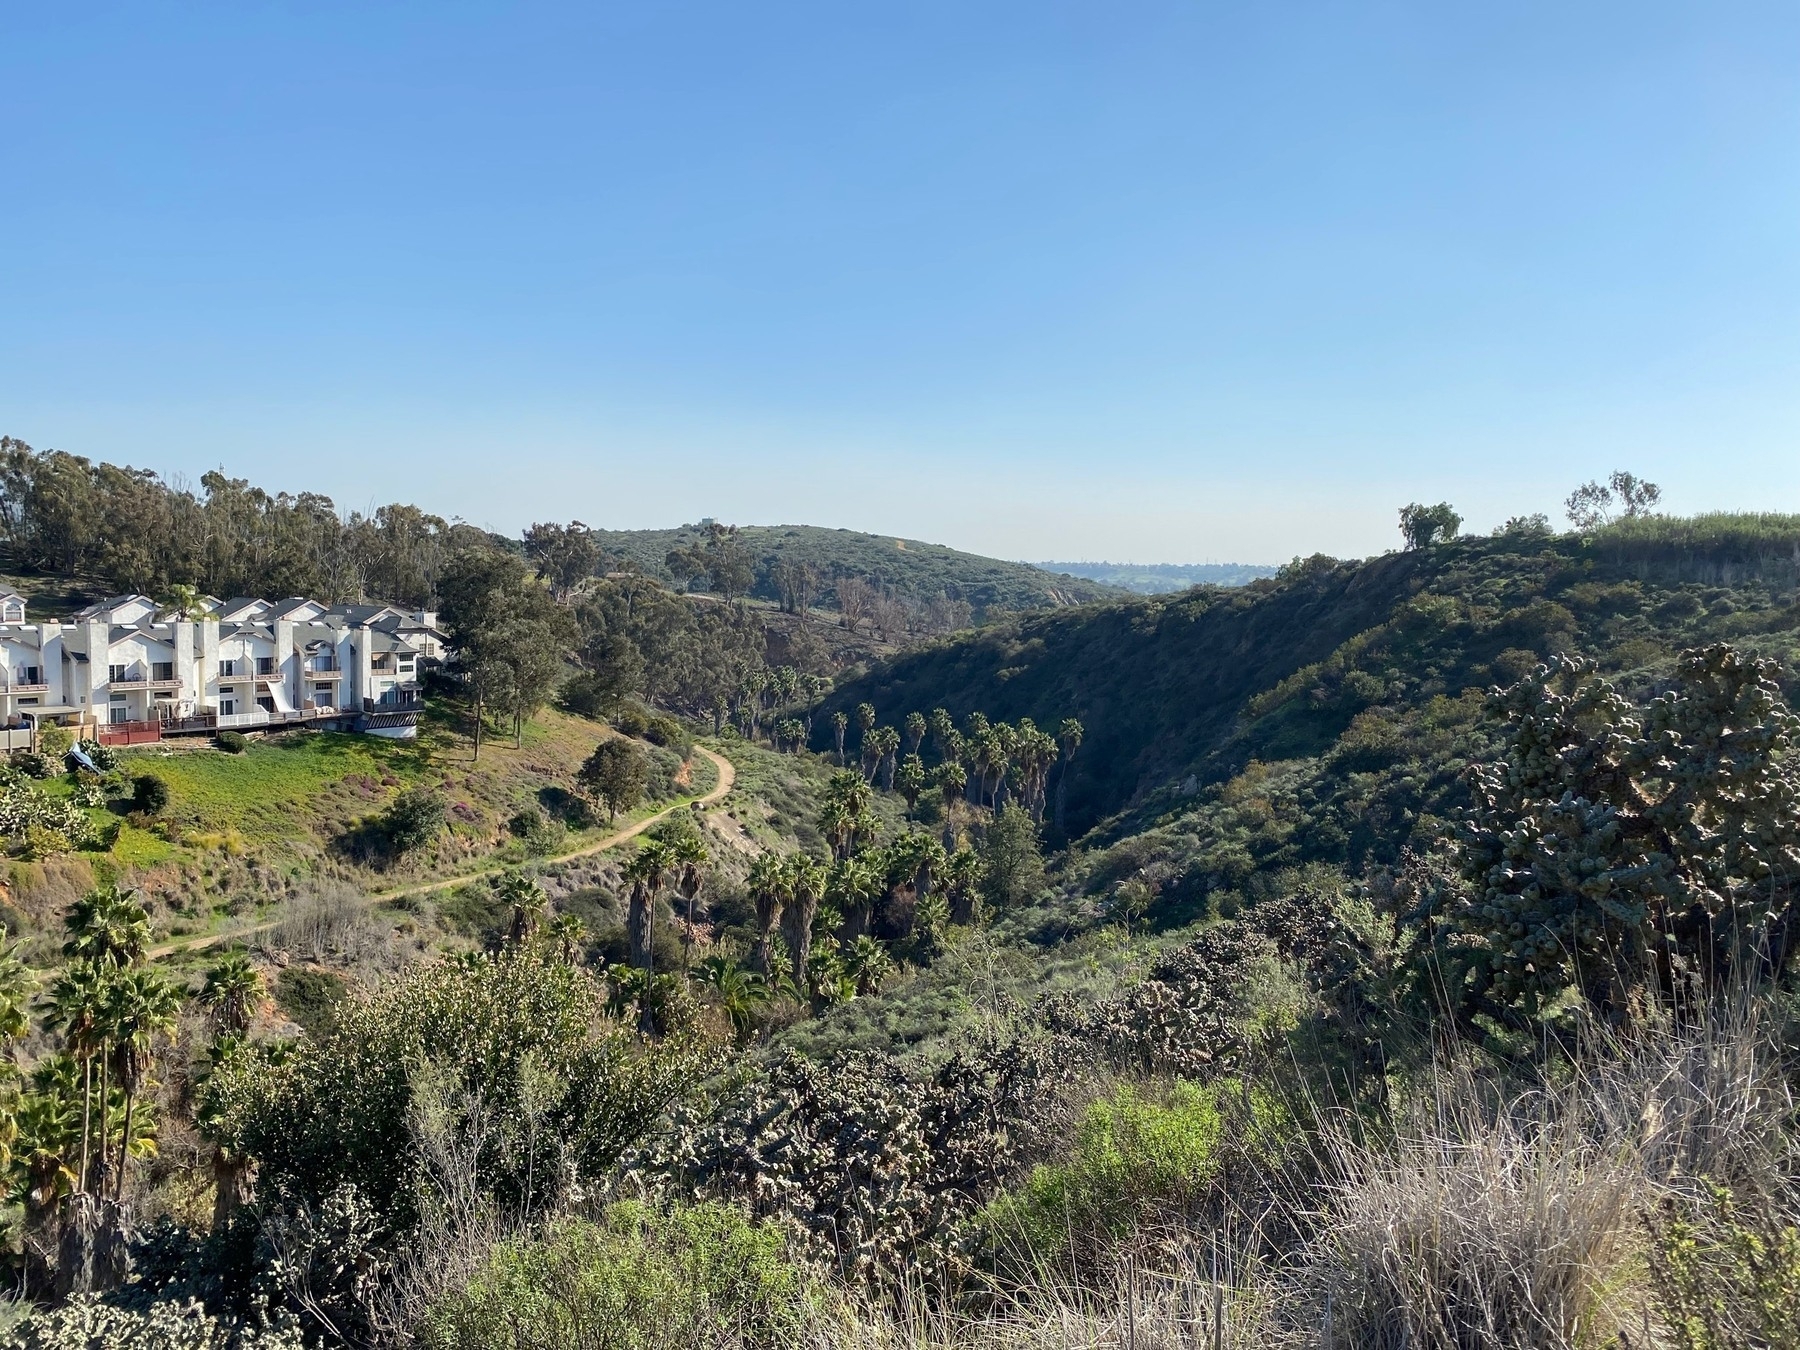 View of a canyon running between scrub covered hills, with a complex of white buildings on the left crest.